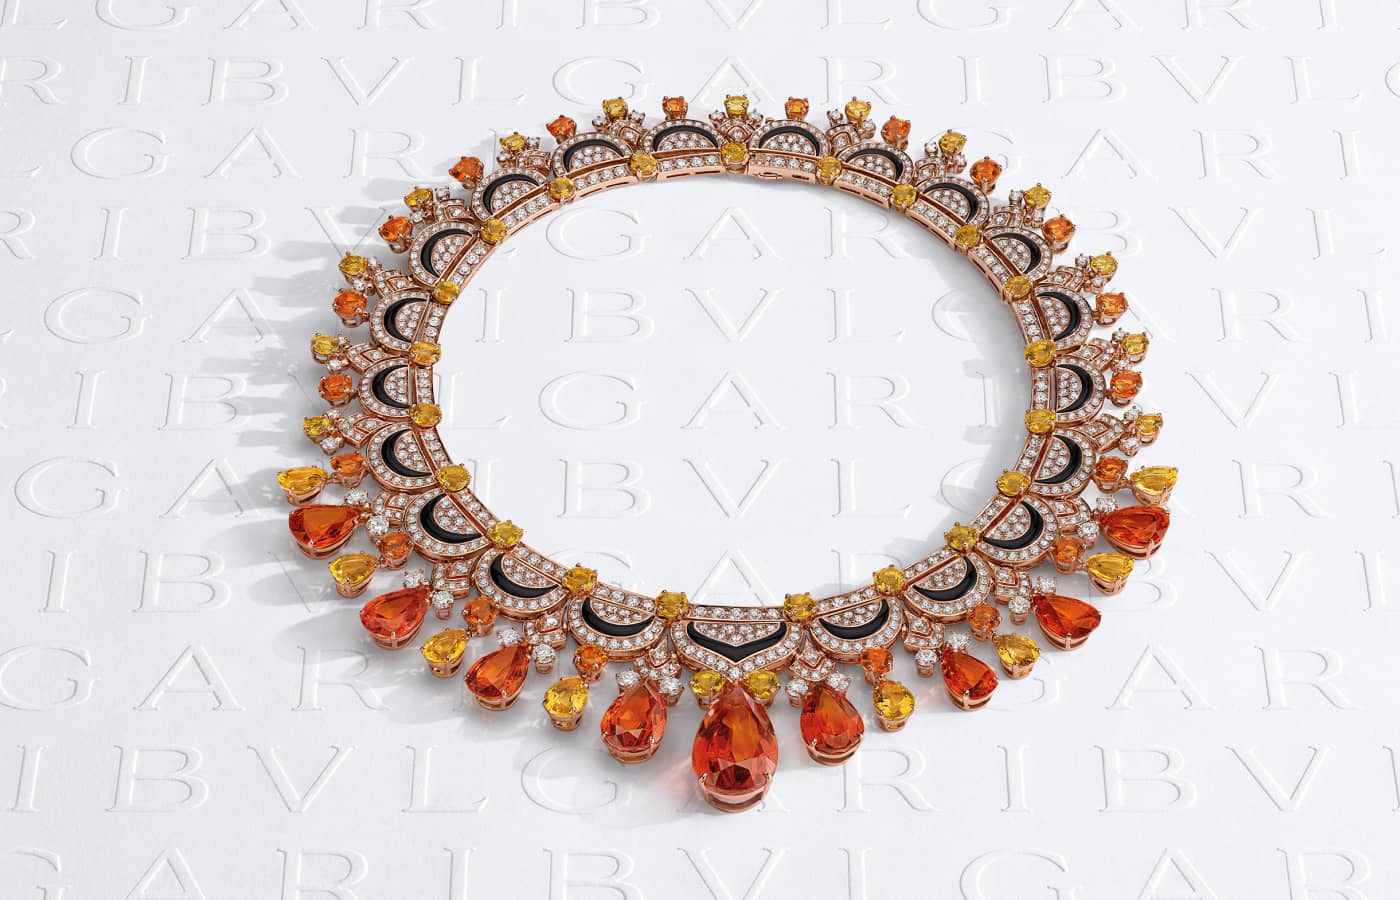 Bulgari looks to the Mediterranean Sea for its new high jewellery collection